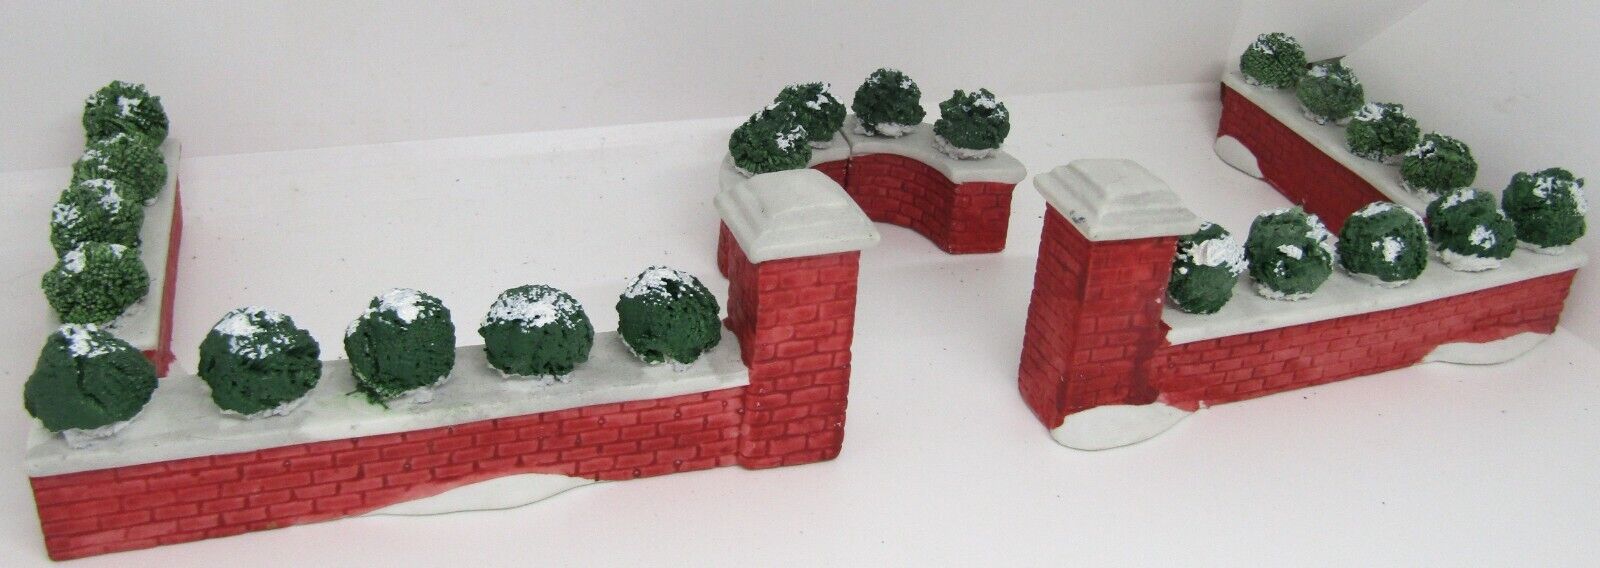 Lemax Dickensvale Brick Wall Set 6 Piece Snow Covered Bushes Fence Porcelain